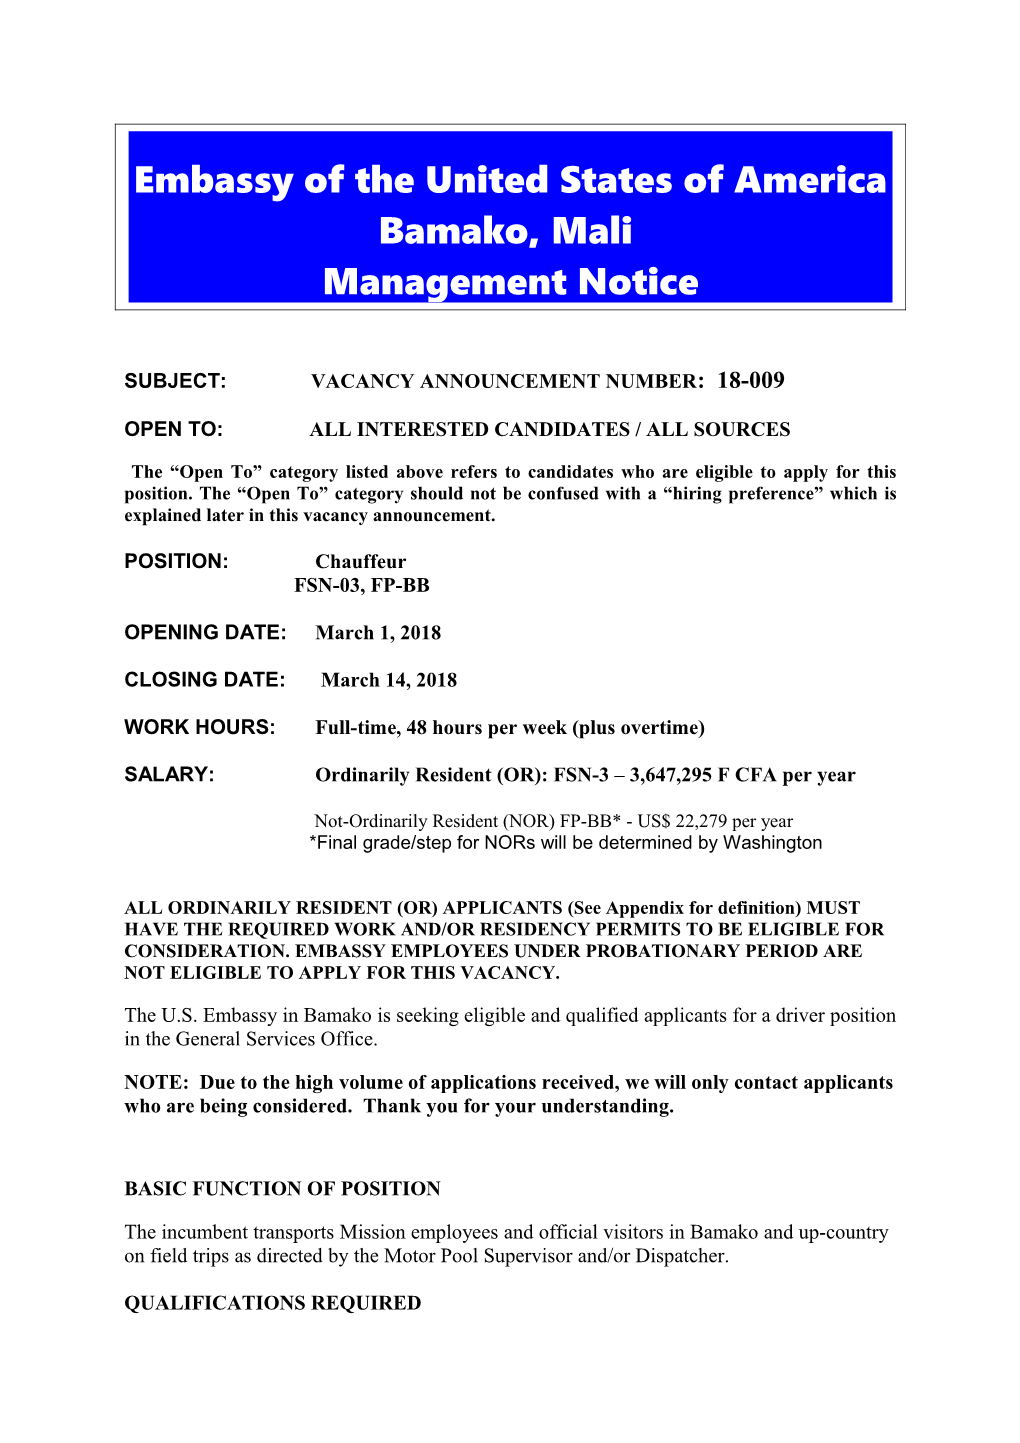 Subject: Vacancy Announcement Number: 18-009